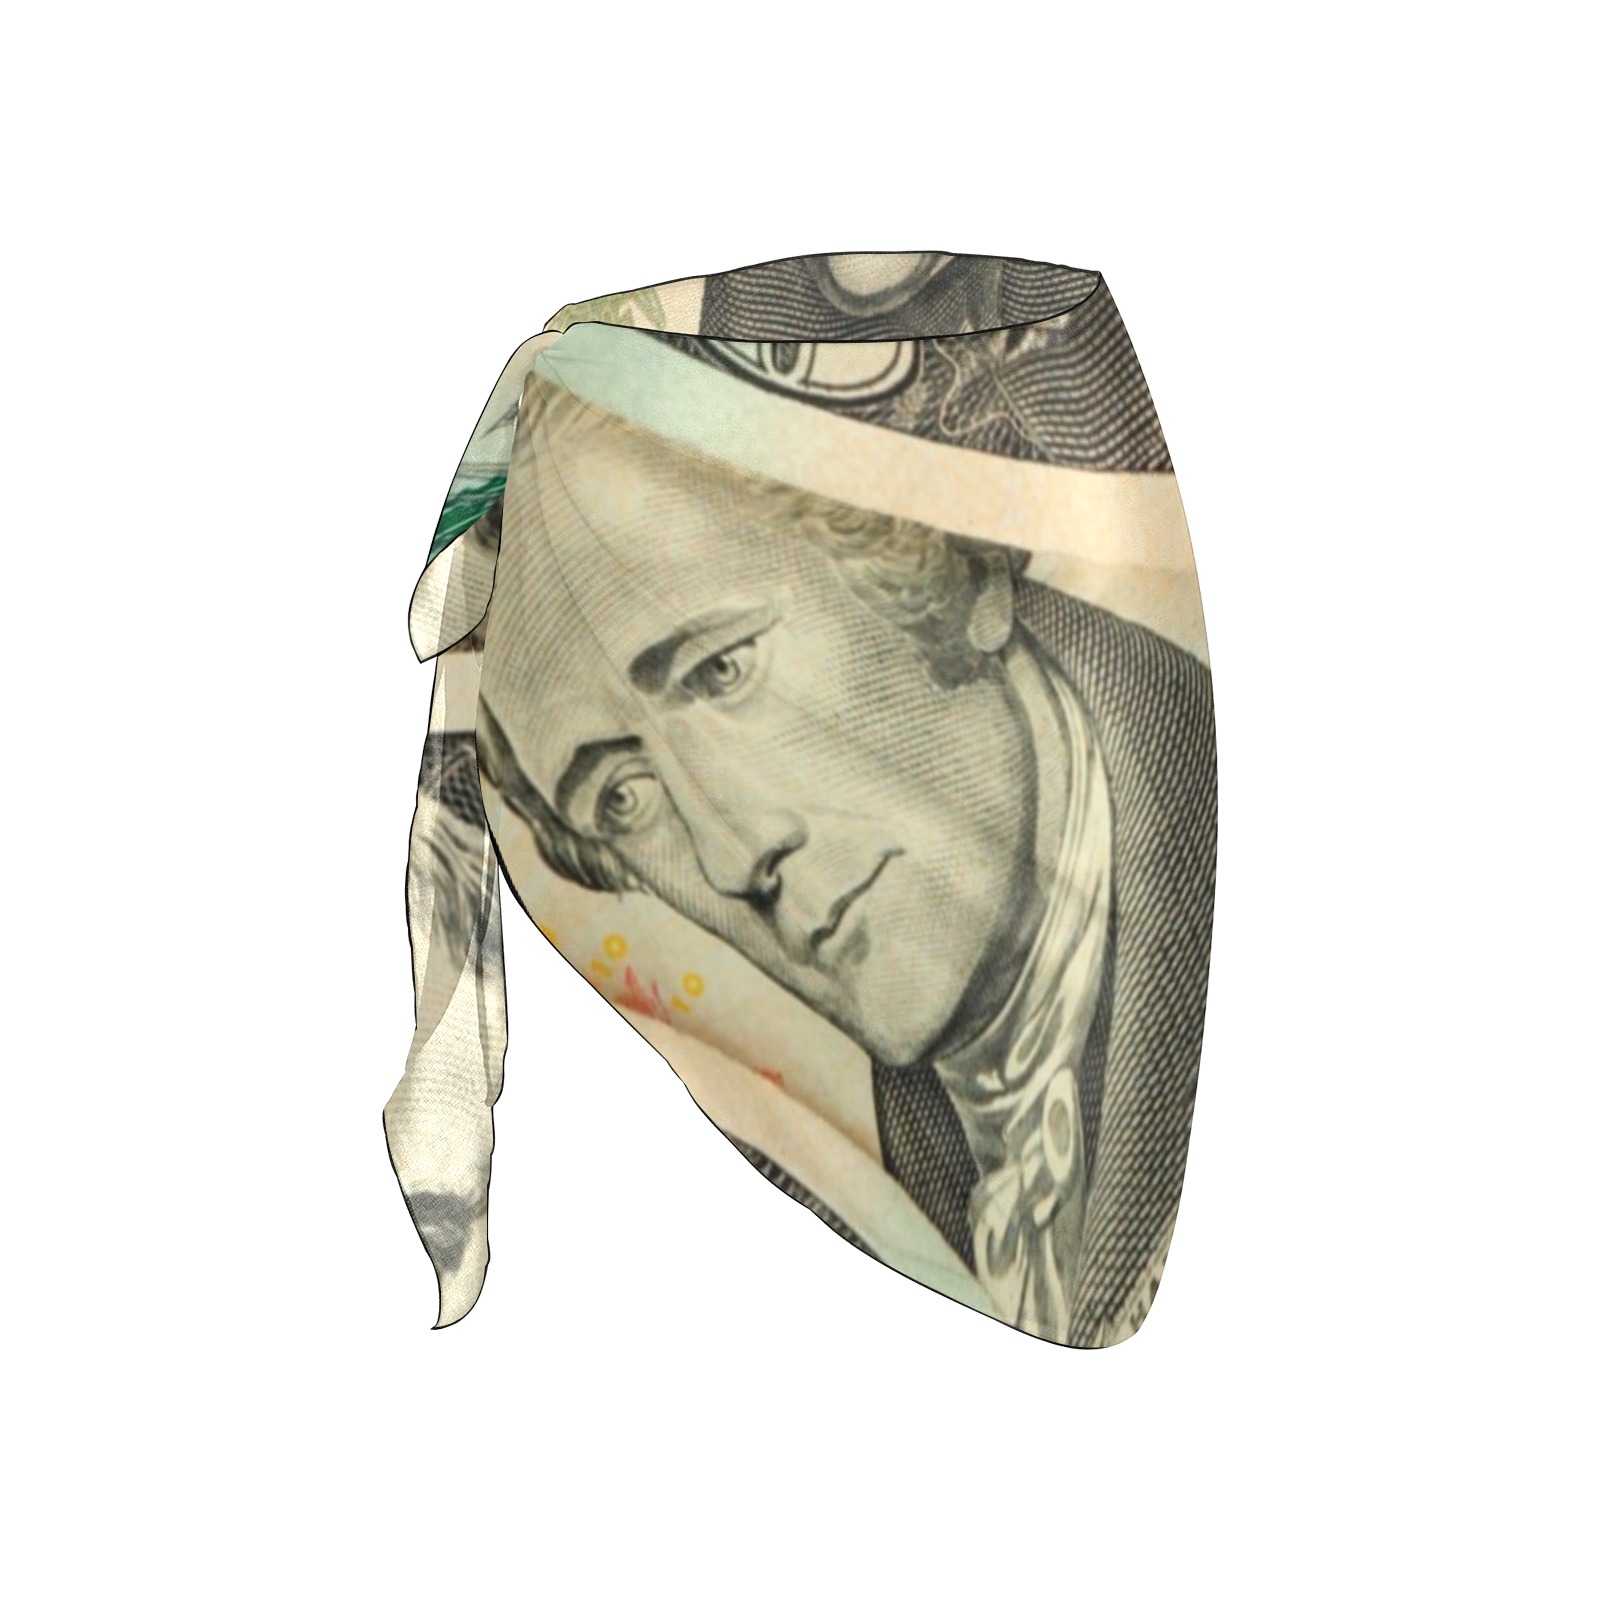 US PAPER CURRENCY Beach Sarong Wrap